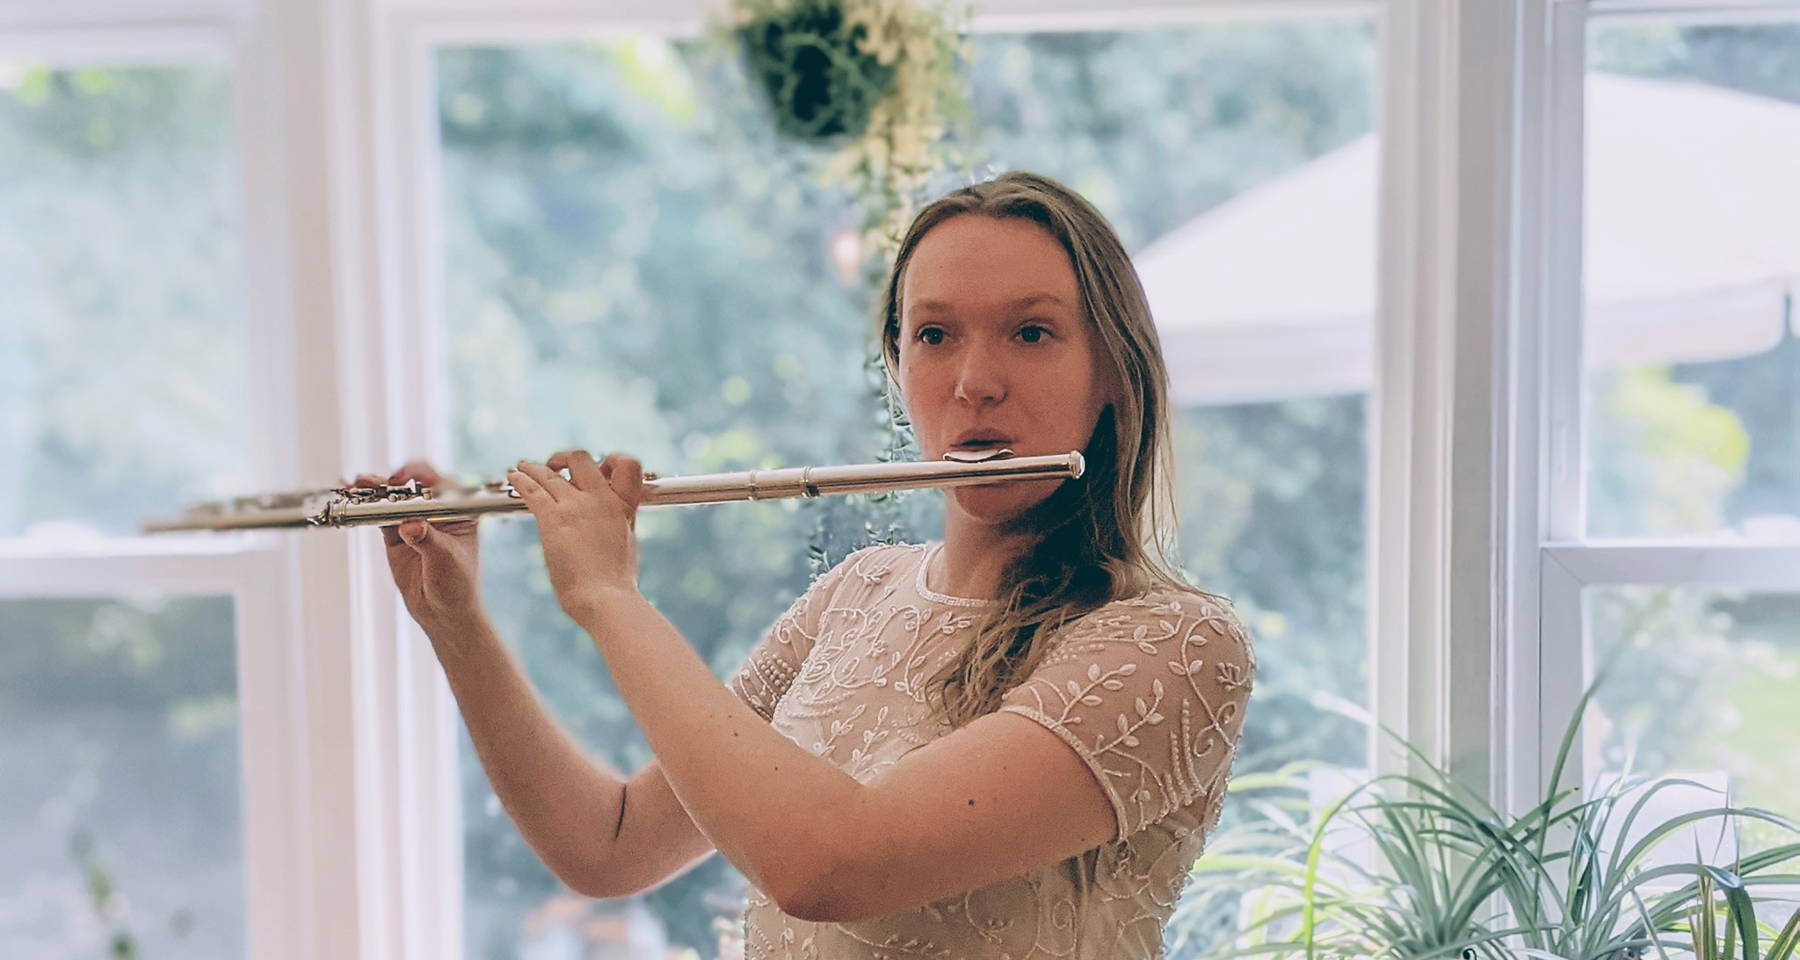 Flute with Faith - Solo Flute Recital on Music & Nature